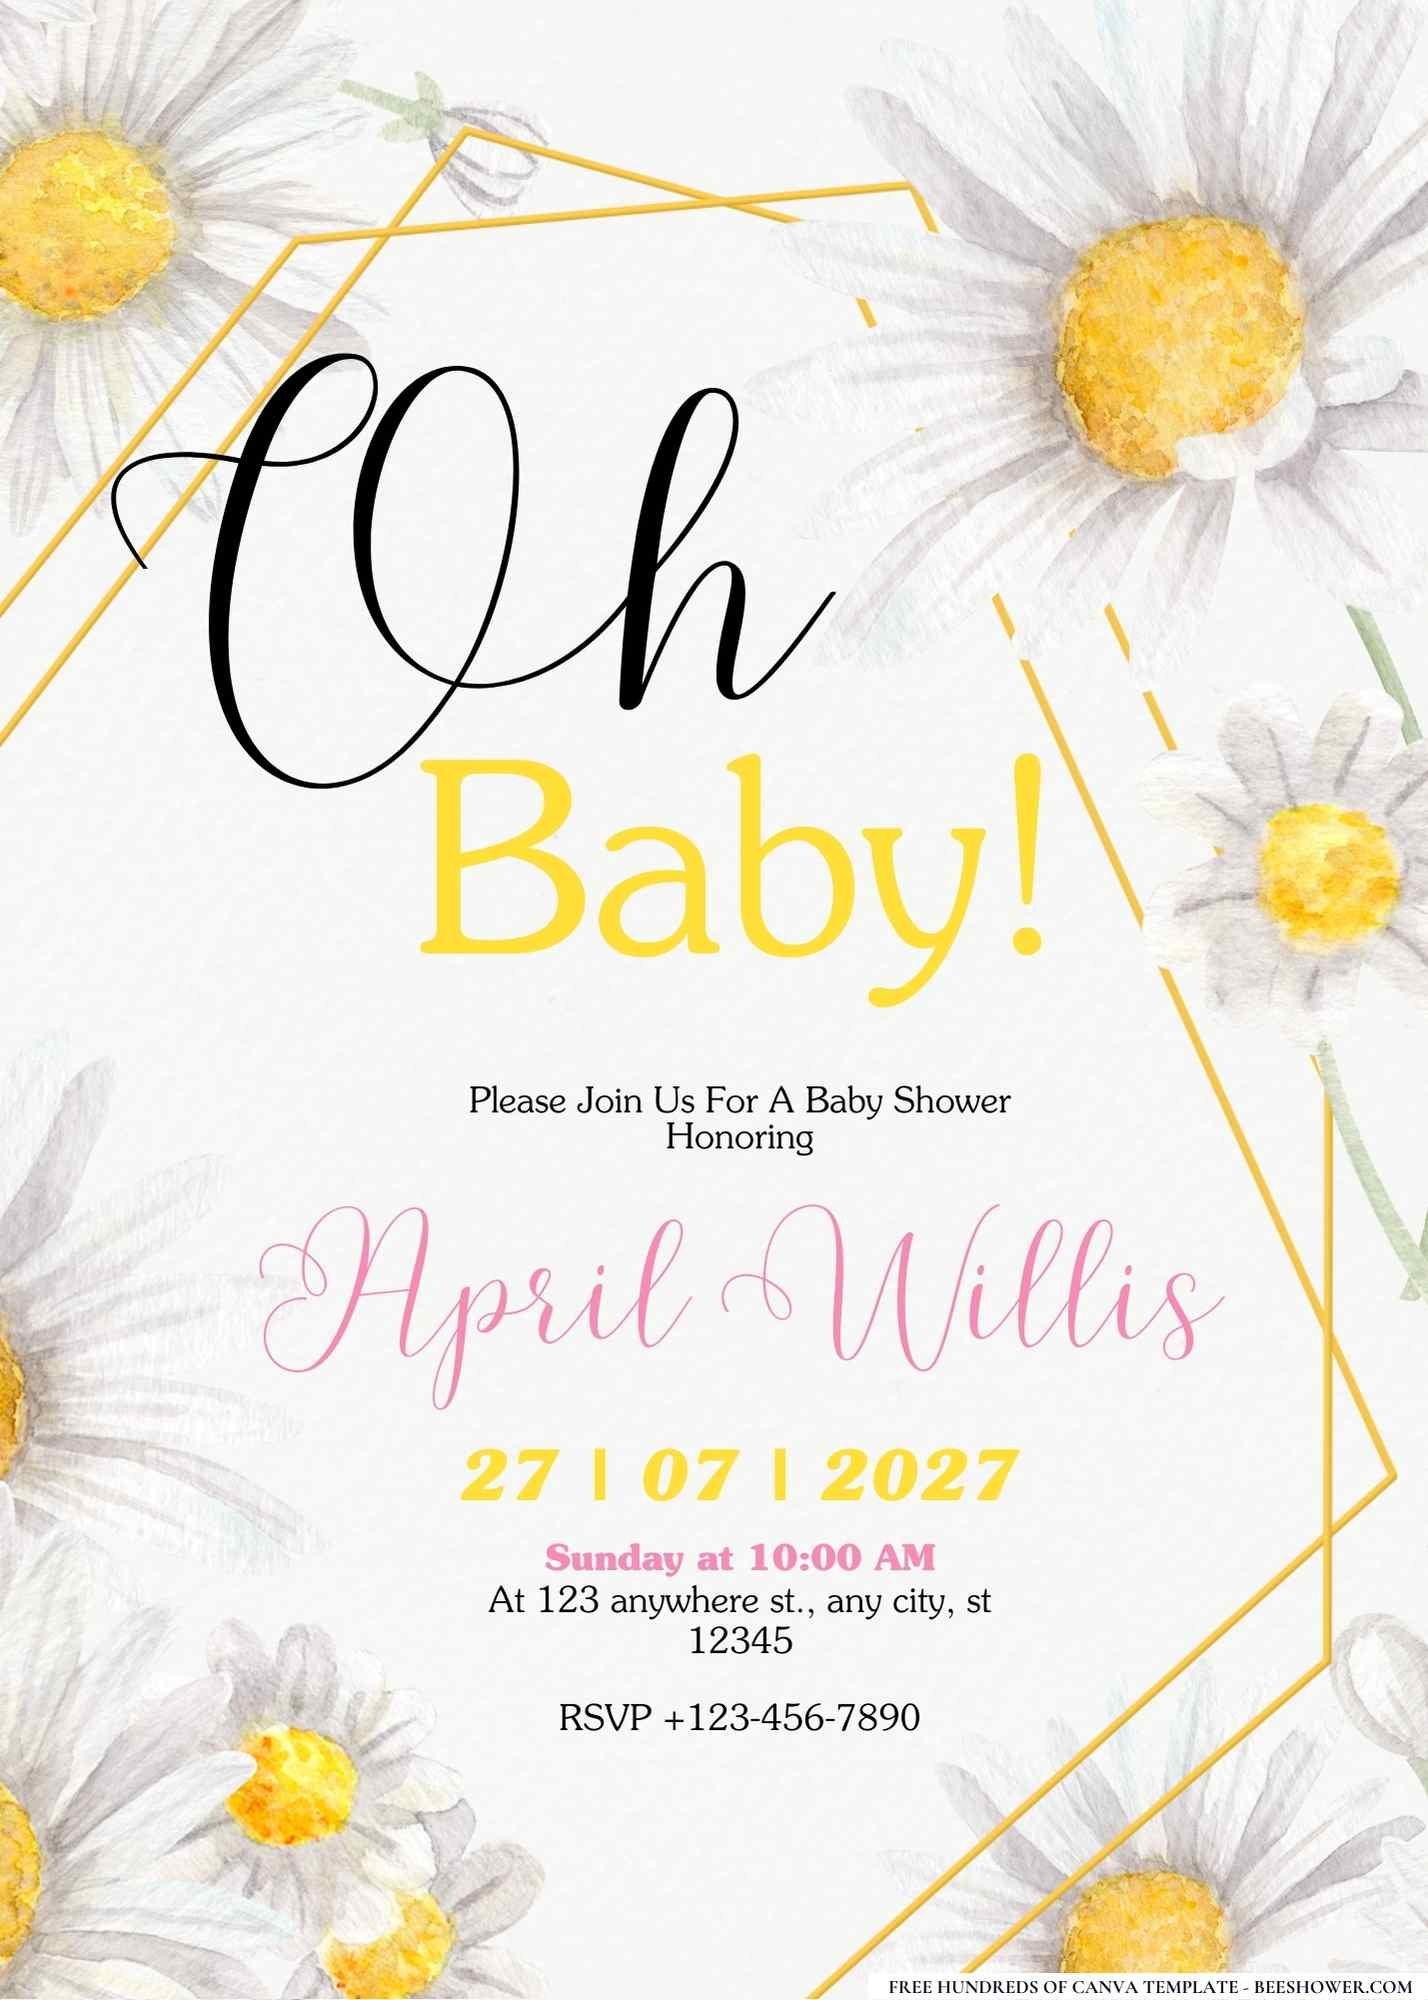 Daisy Chains of Delight Baby Shower Invitation